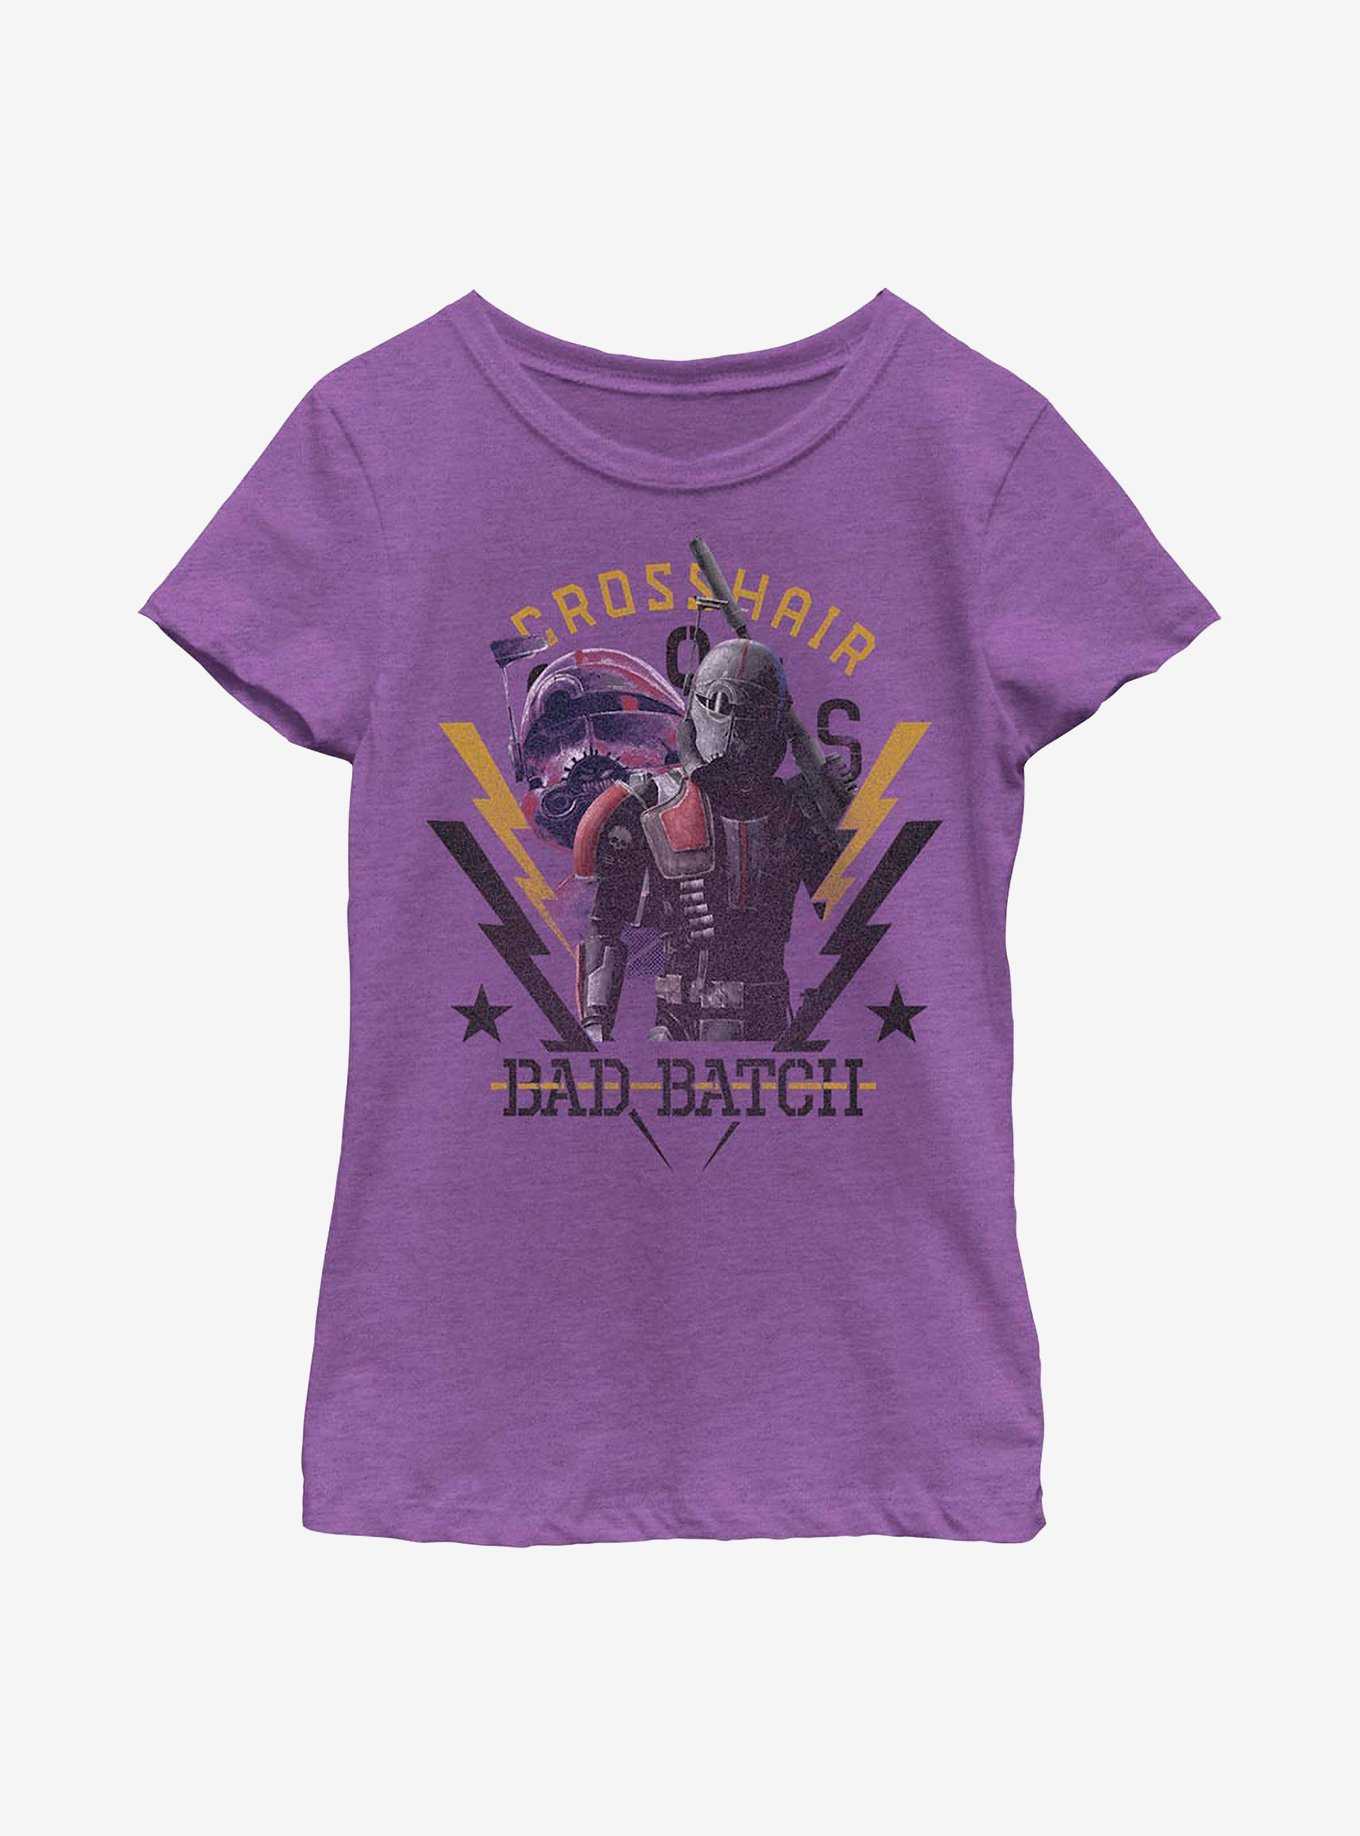 Star Wars: The Bad Batch Cross Army Crate Youth Girls T-Shirt, , hi-res